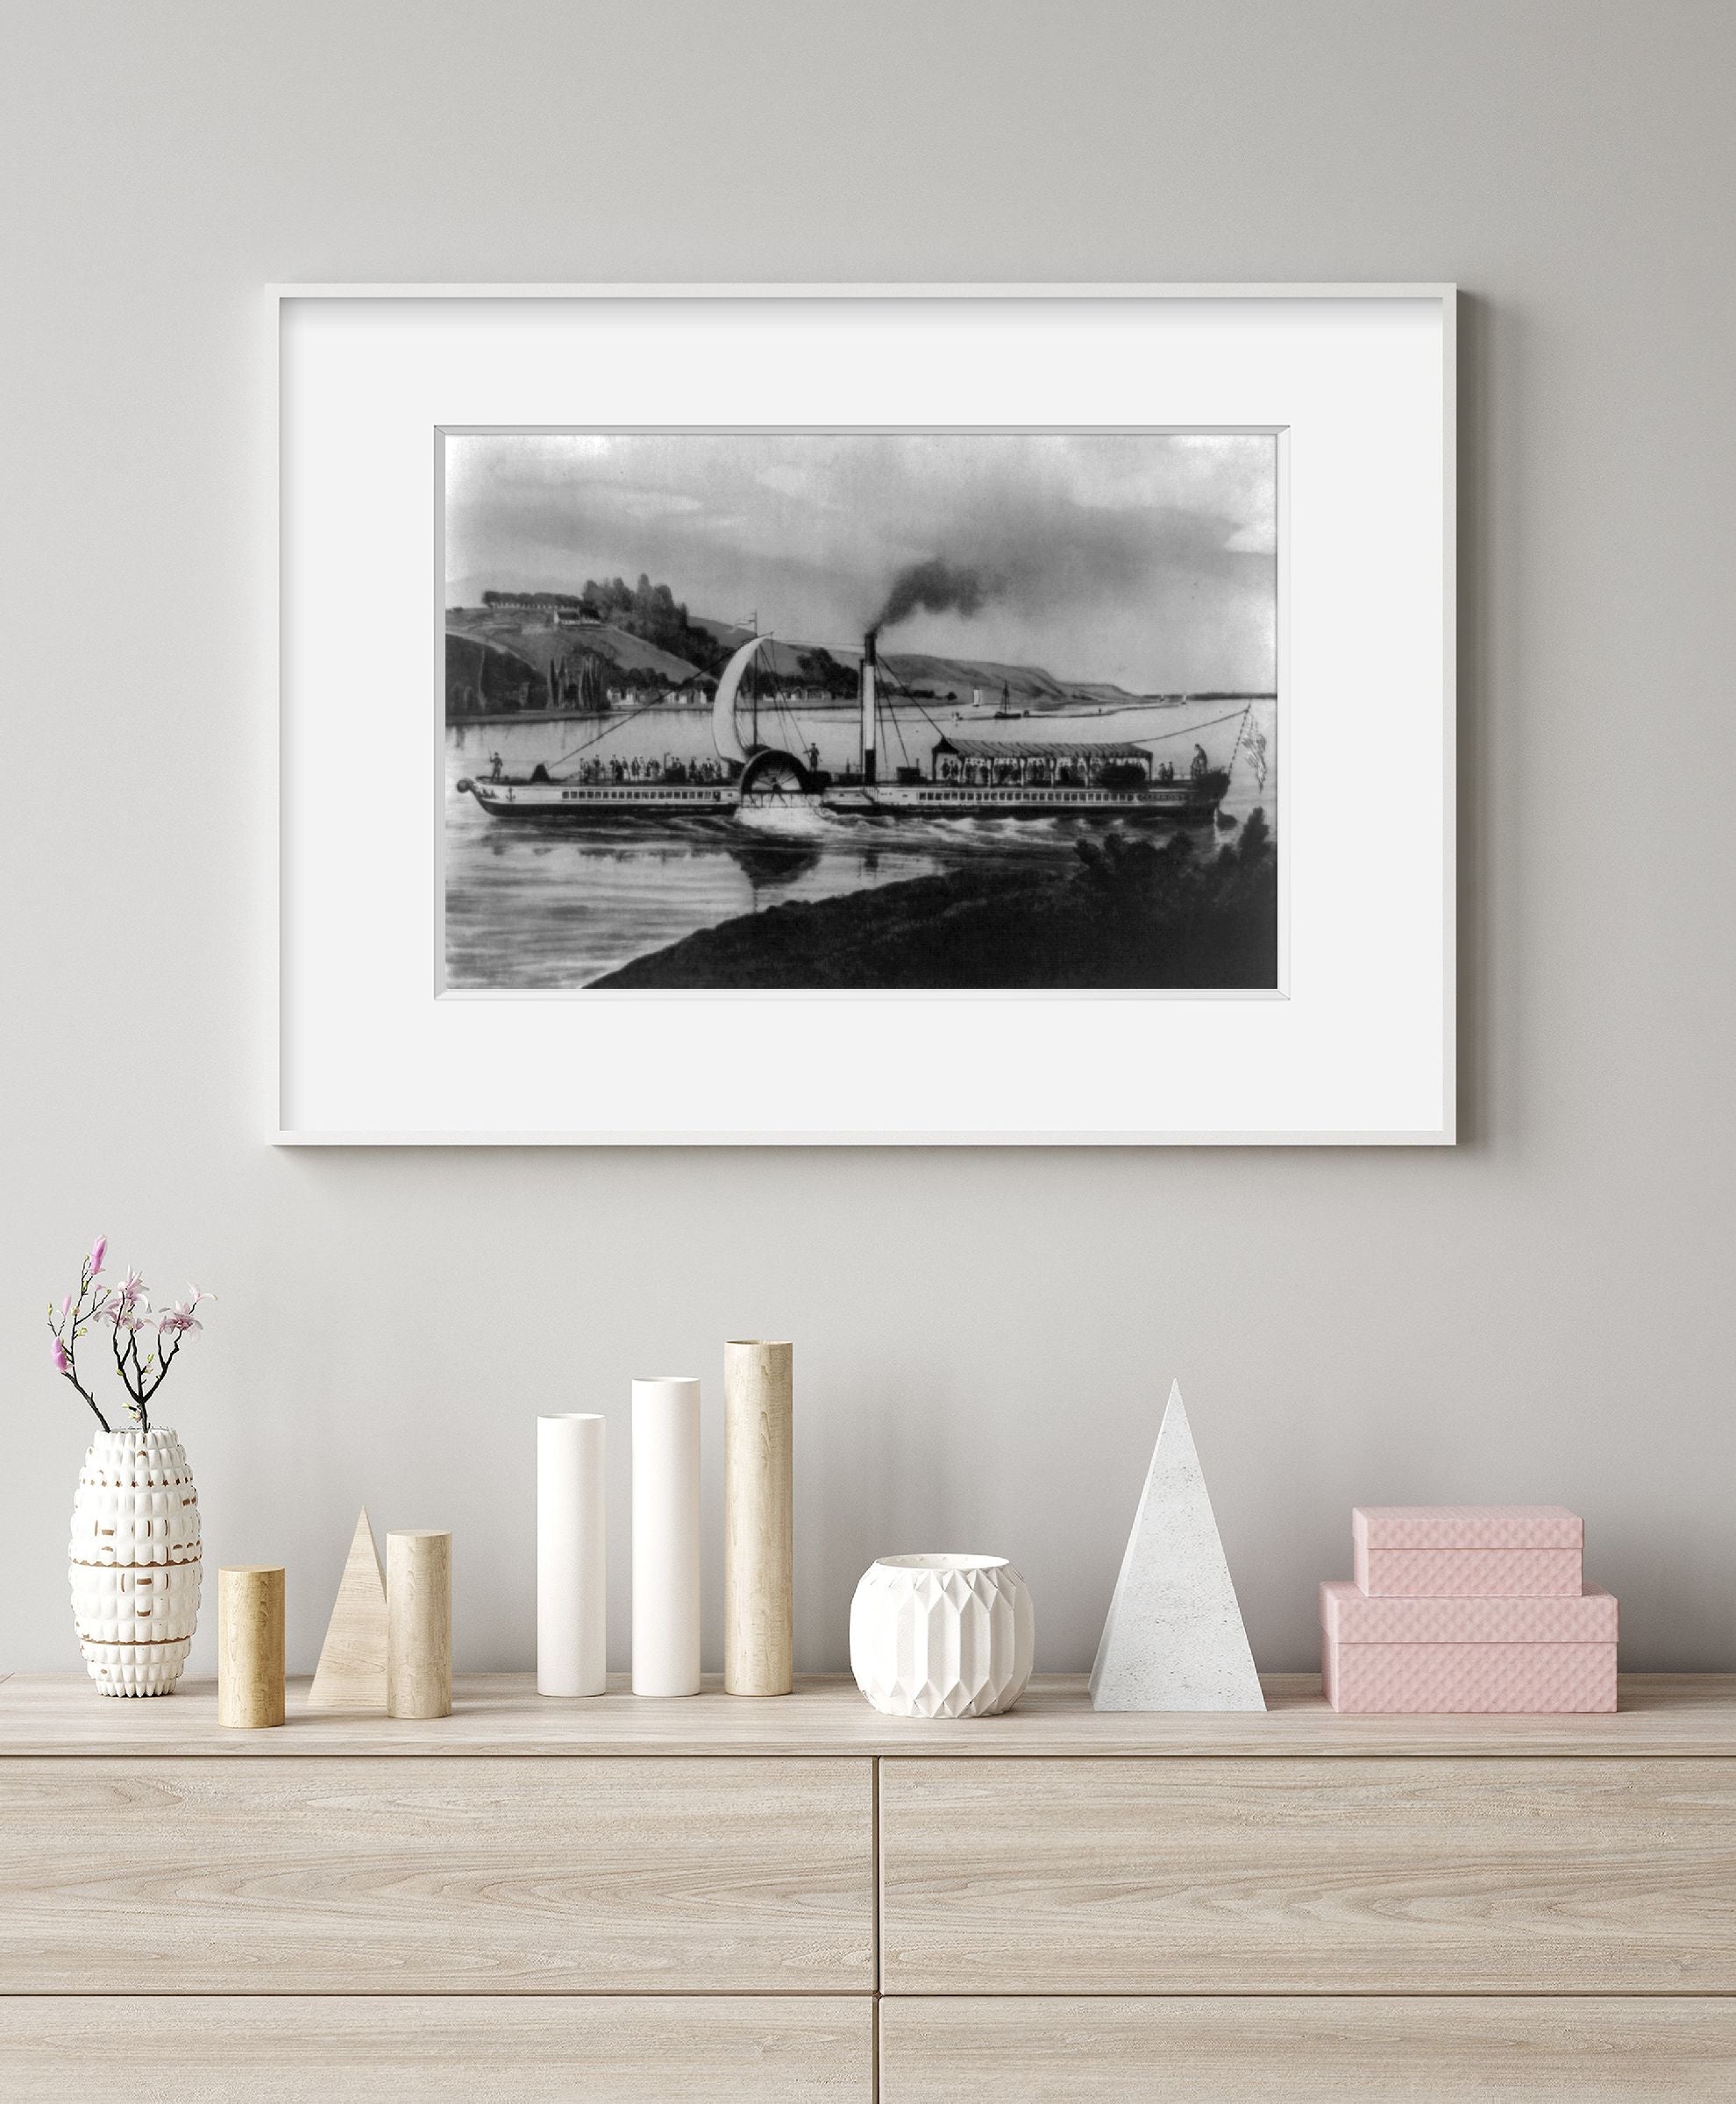 Vintage 191- photograph: The Clermont on the Hudson River(?) in New York Subje